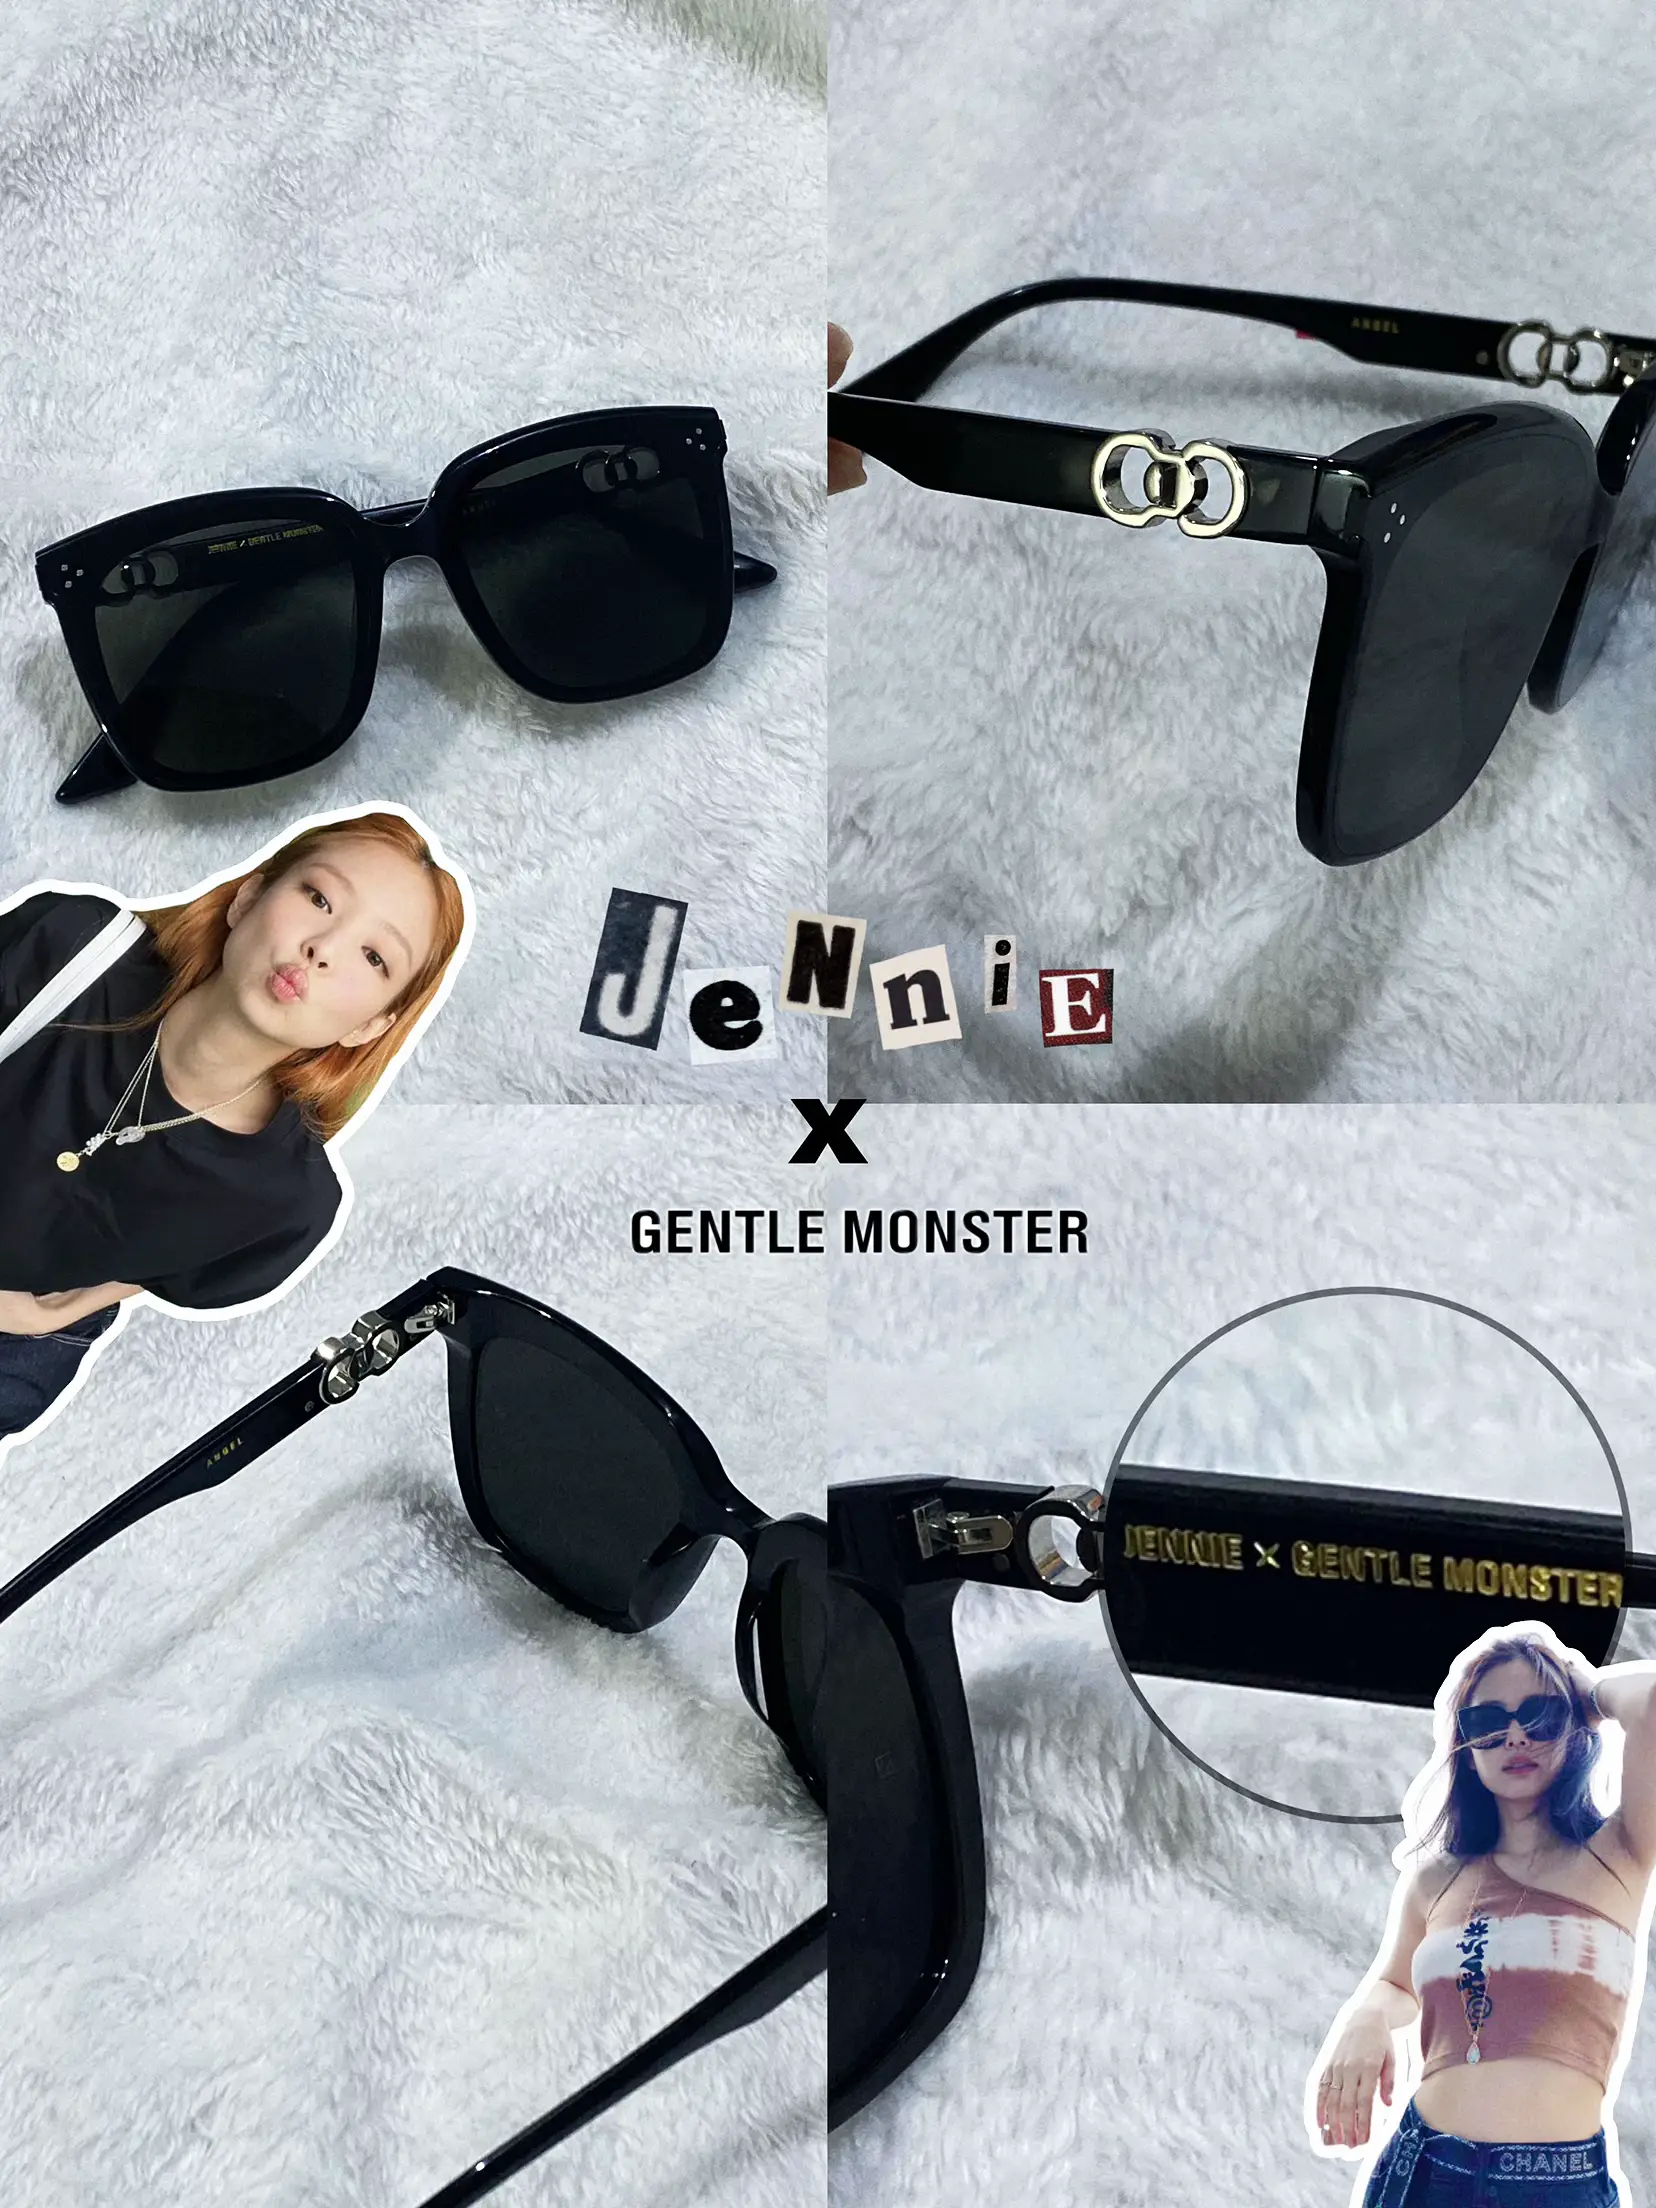 Jennie x Gentle Sunglasses Review 😎 This call is not missed